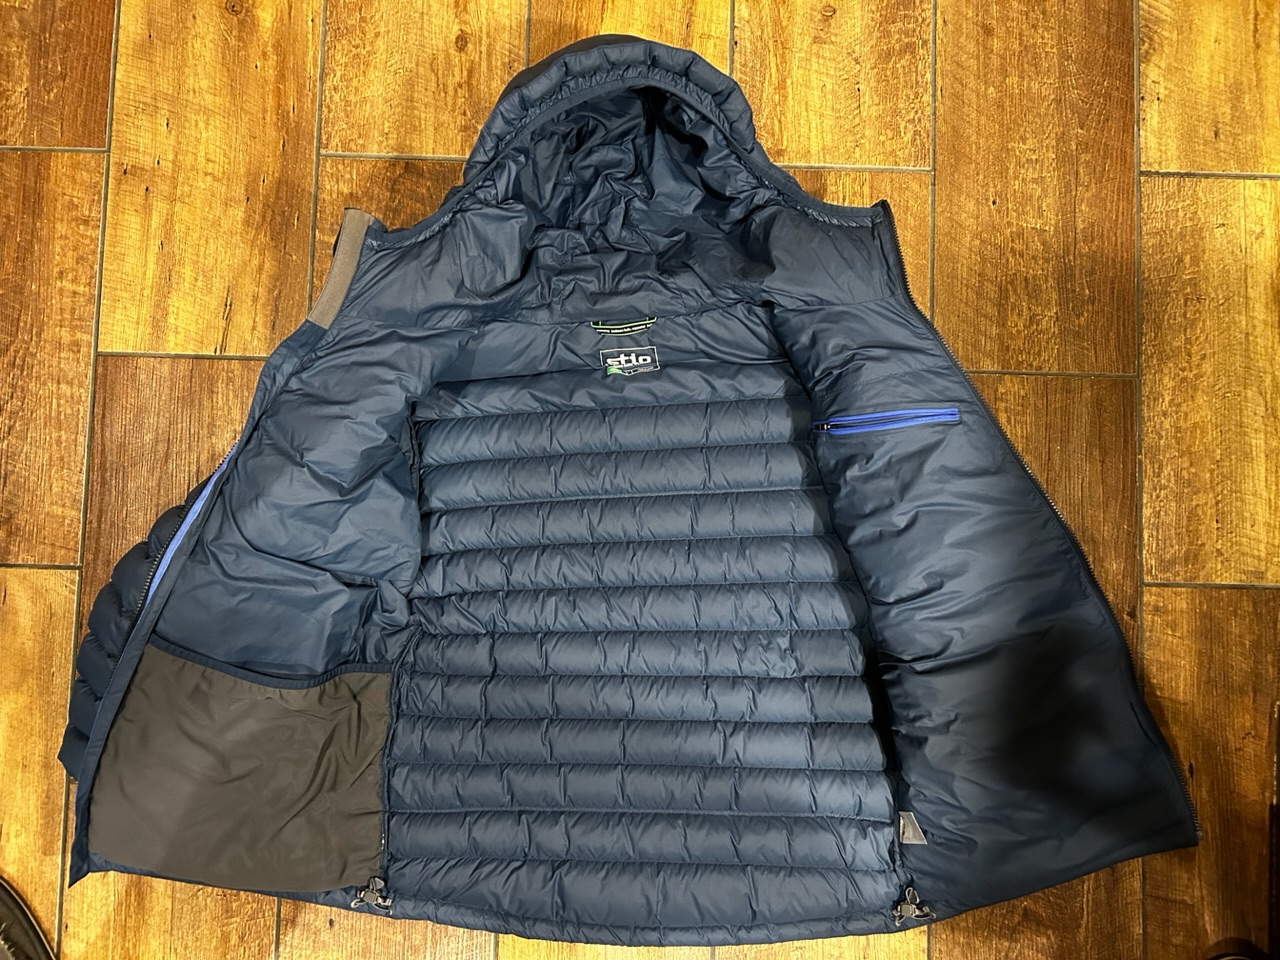 Stio Hometown Down Hooded Jacket - Backpacking Light